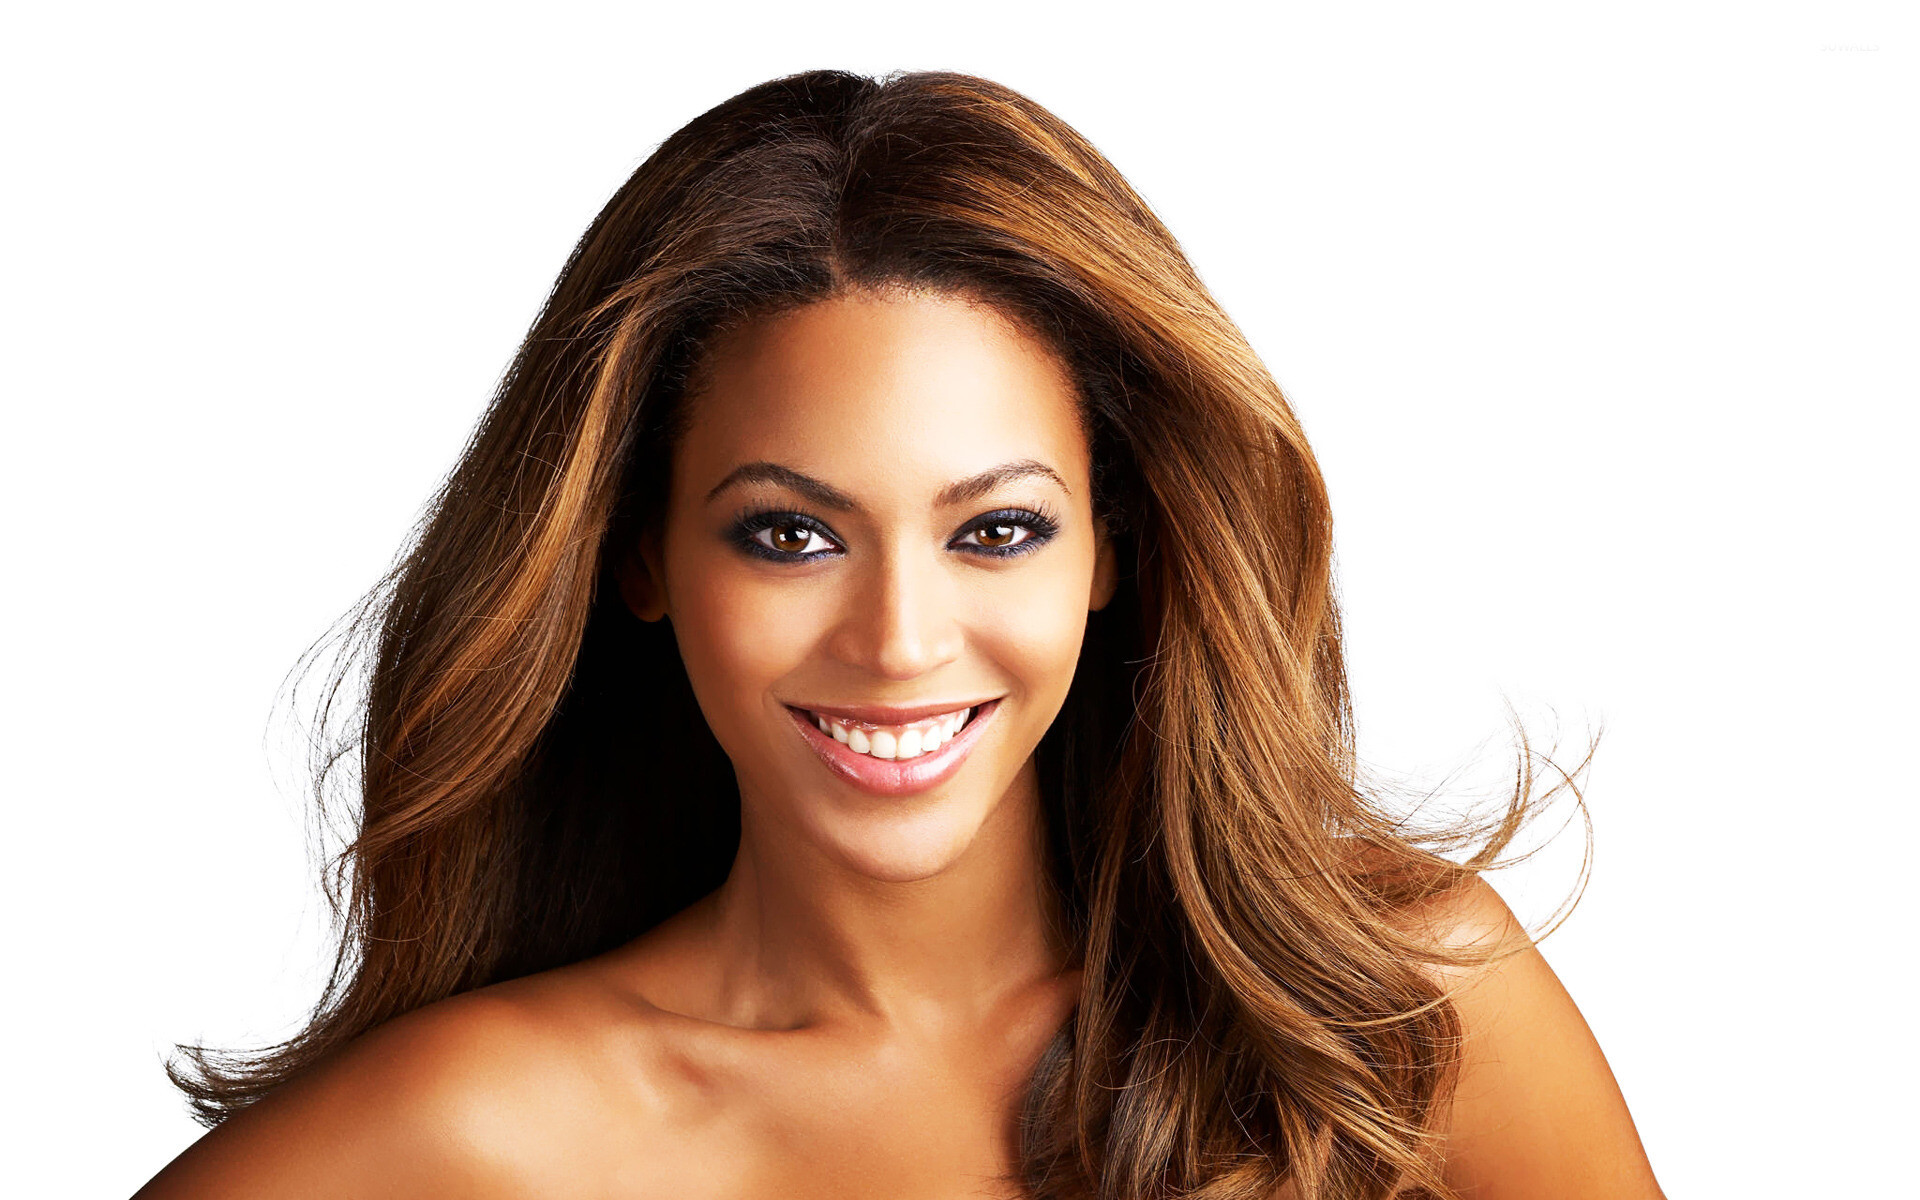 Beyonce: The most Grammy nominated woman artist, Dangerously in Love, 2003. 1920x1200 HD Wallpaper.